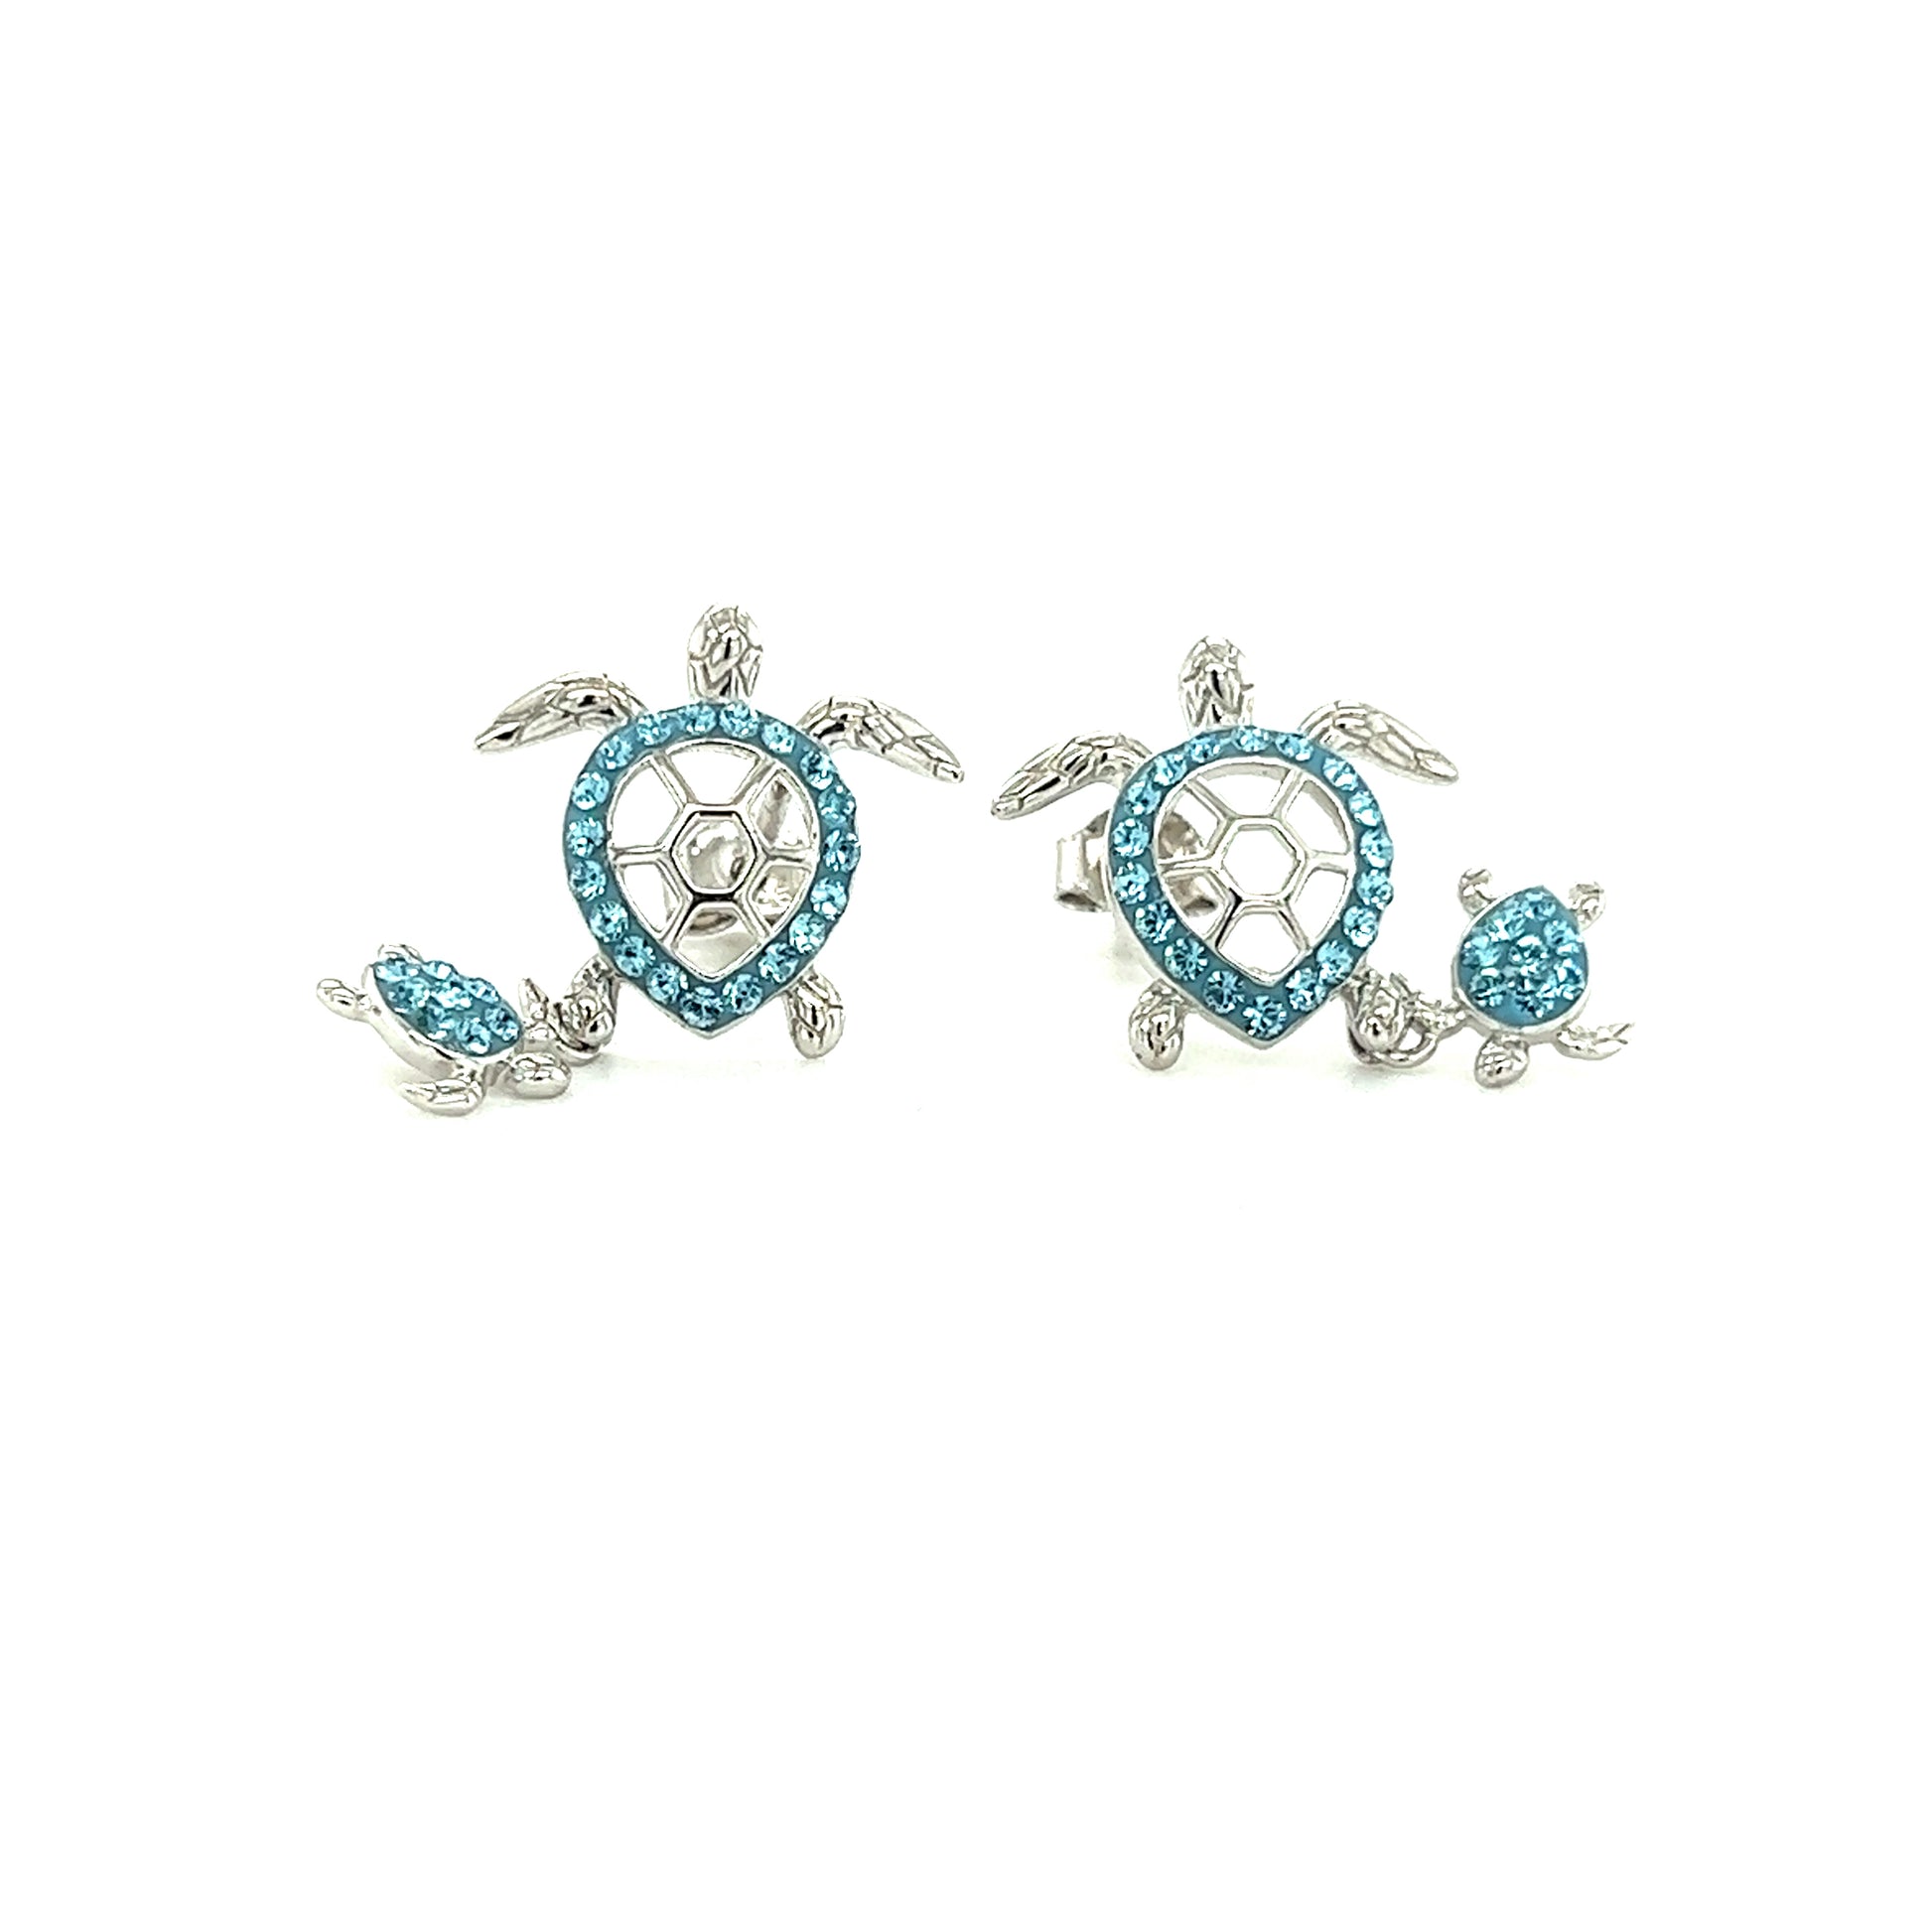 Mother and Baby Sea Turtle Earrings with Aqua Crystals in Sterling Silver Front View